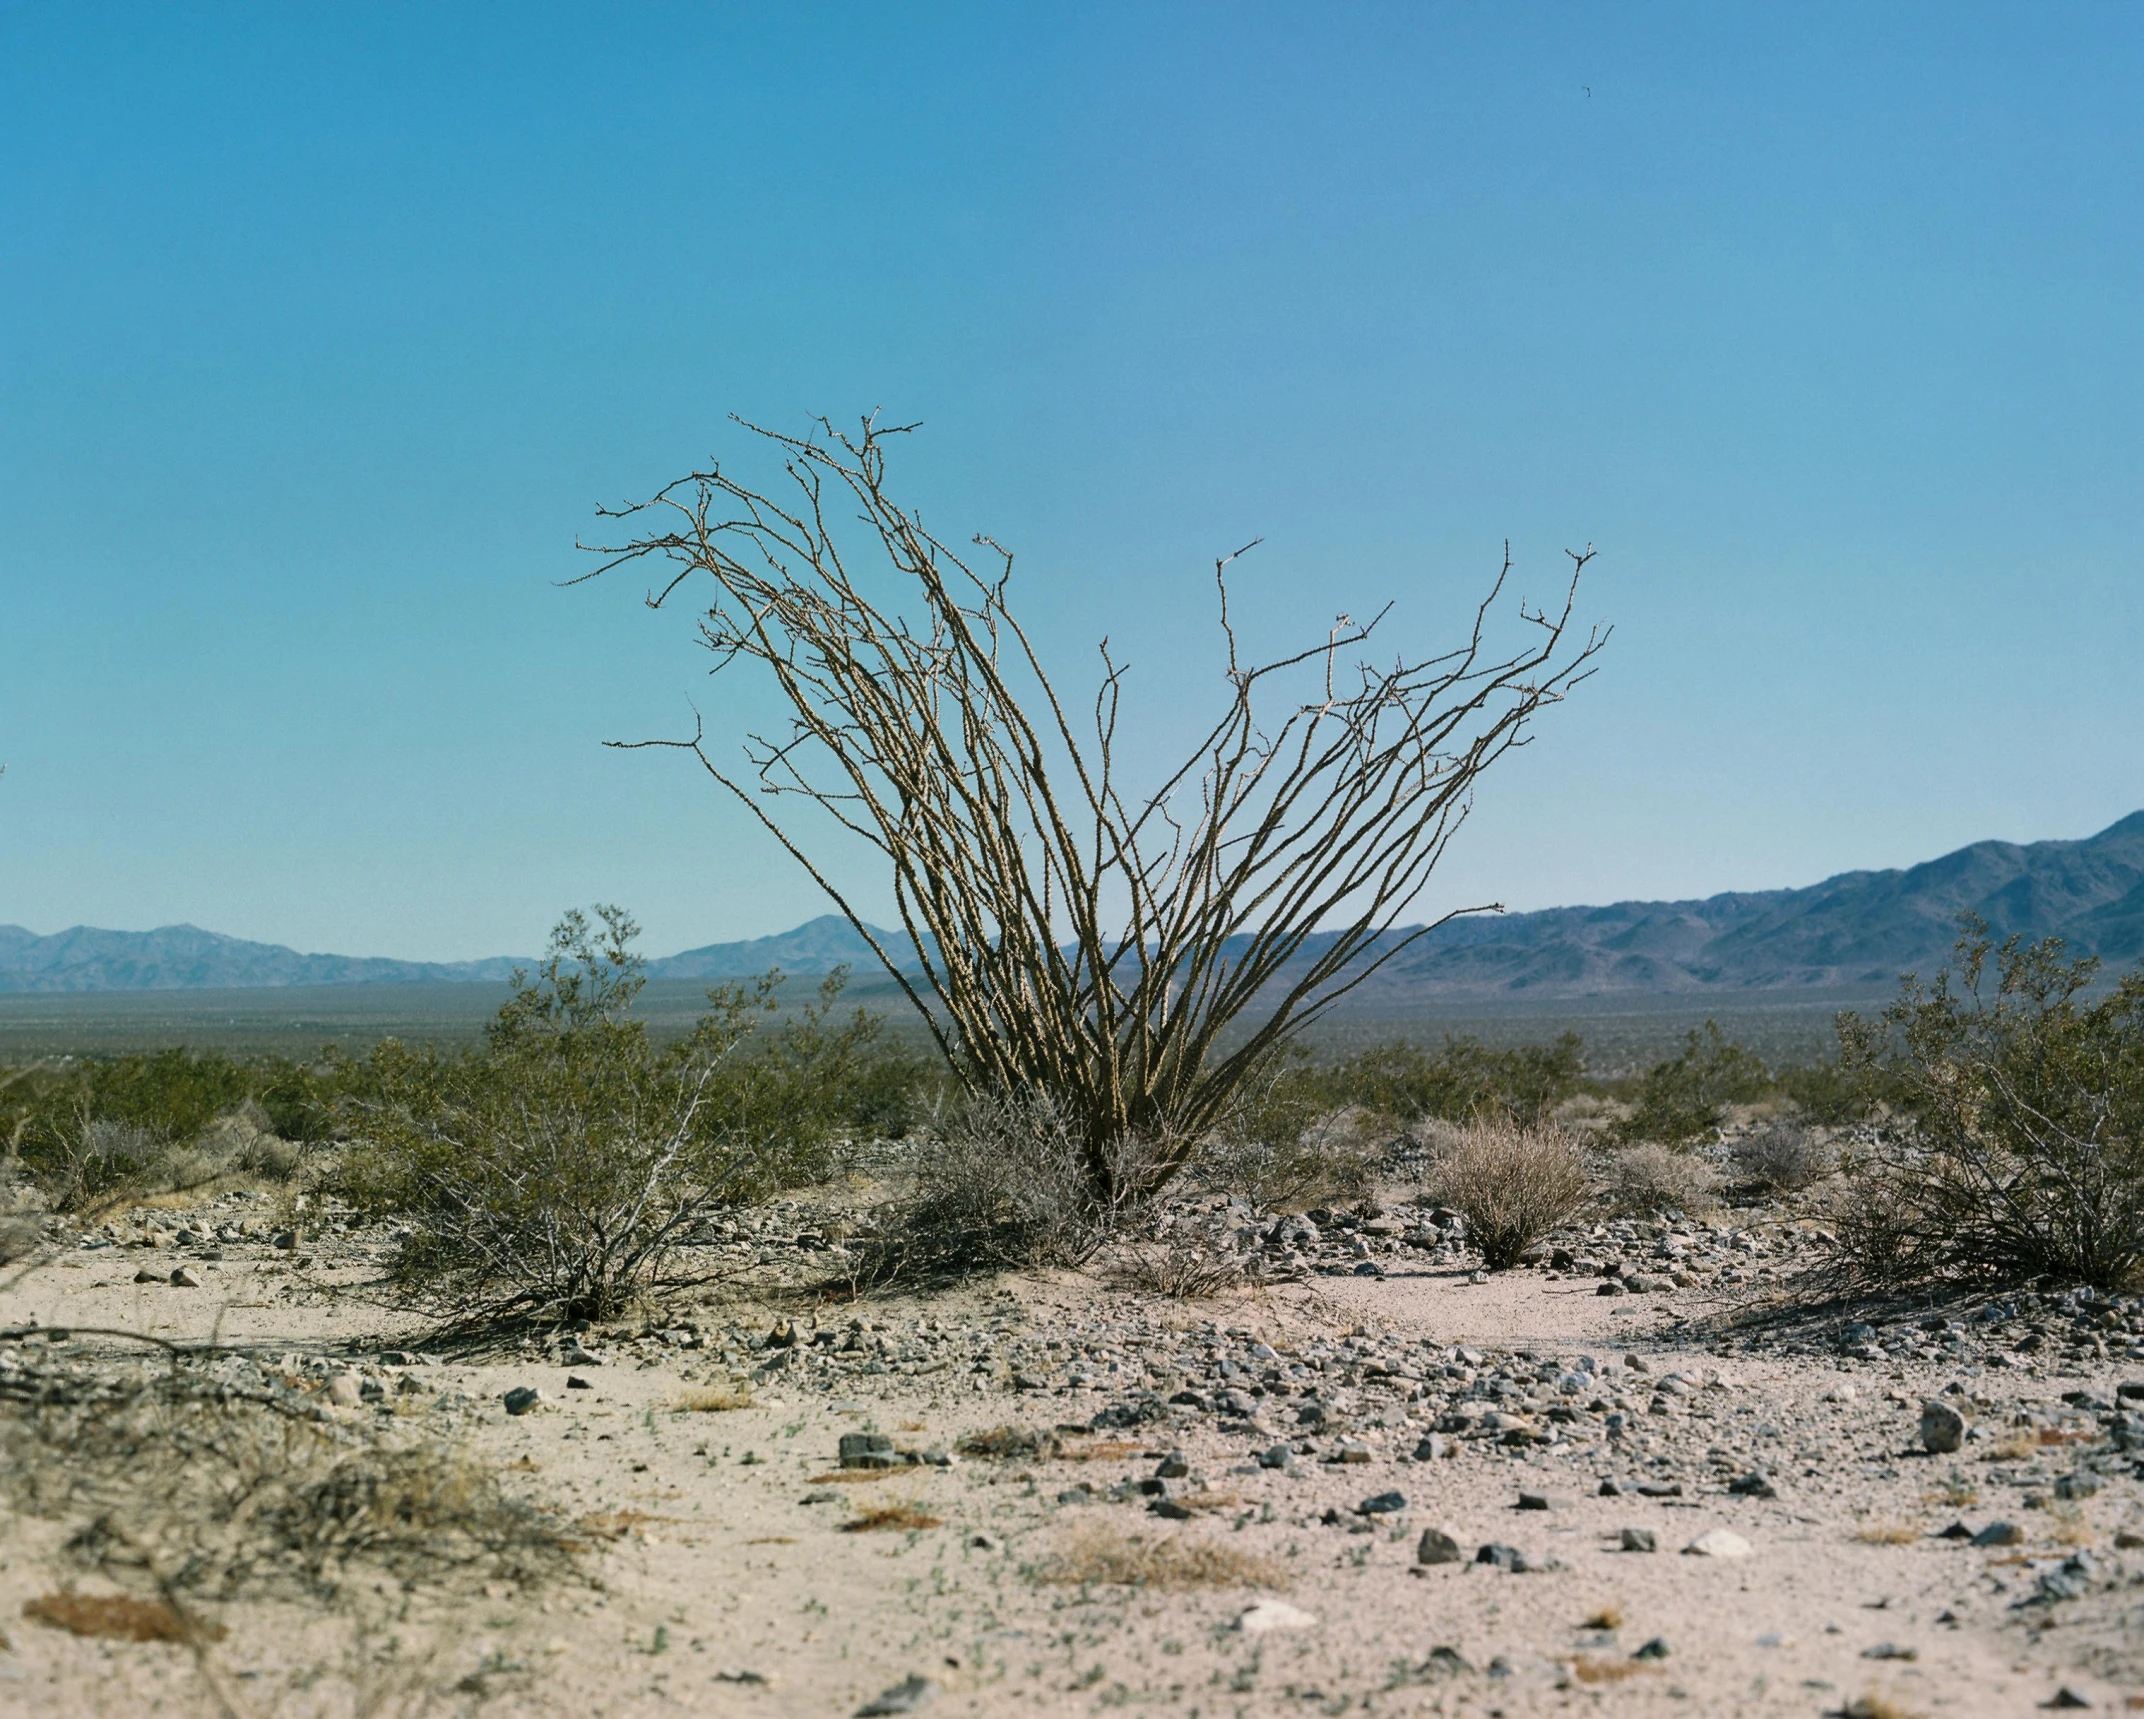 a lonely tree sitting alone in the desert